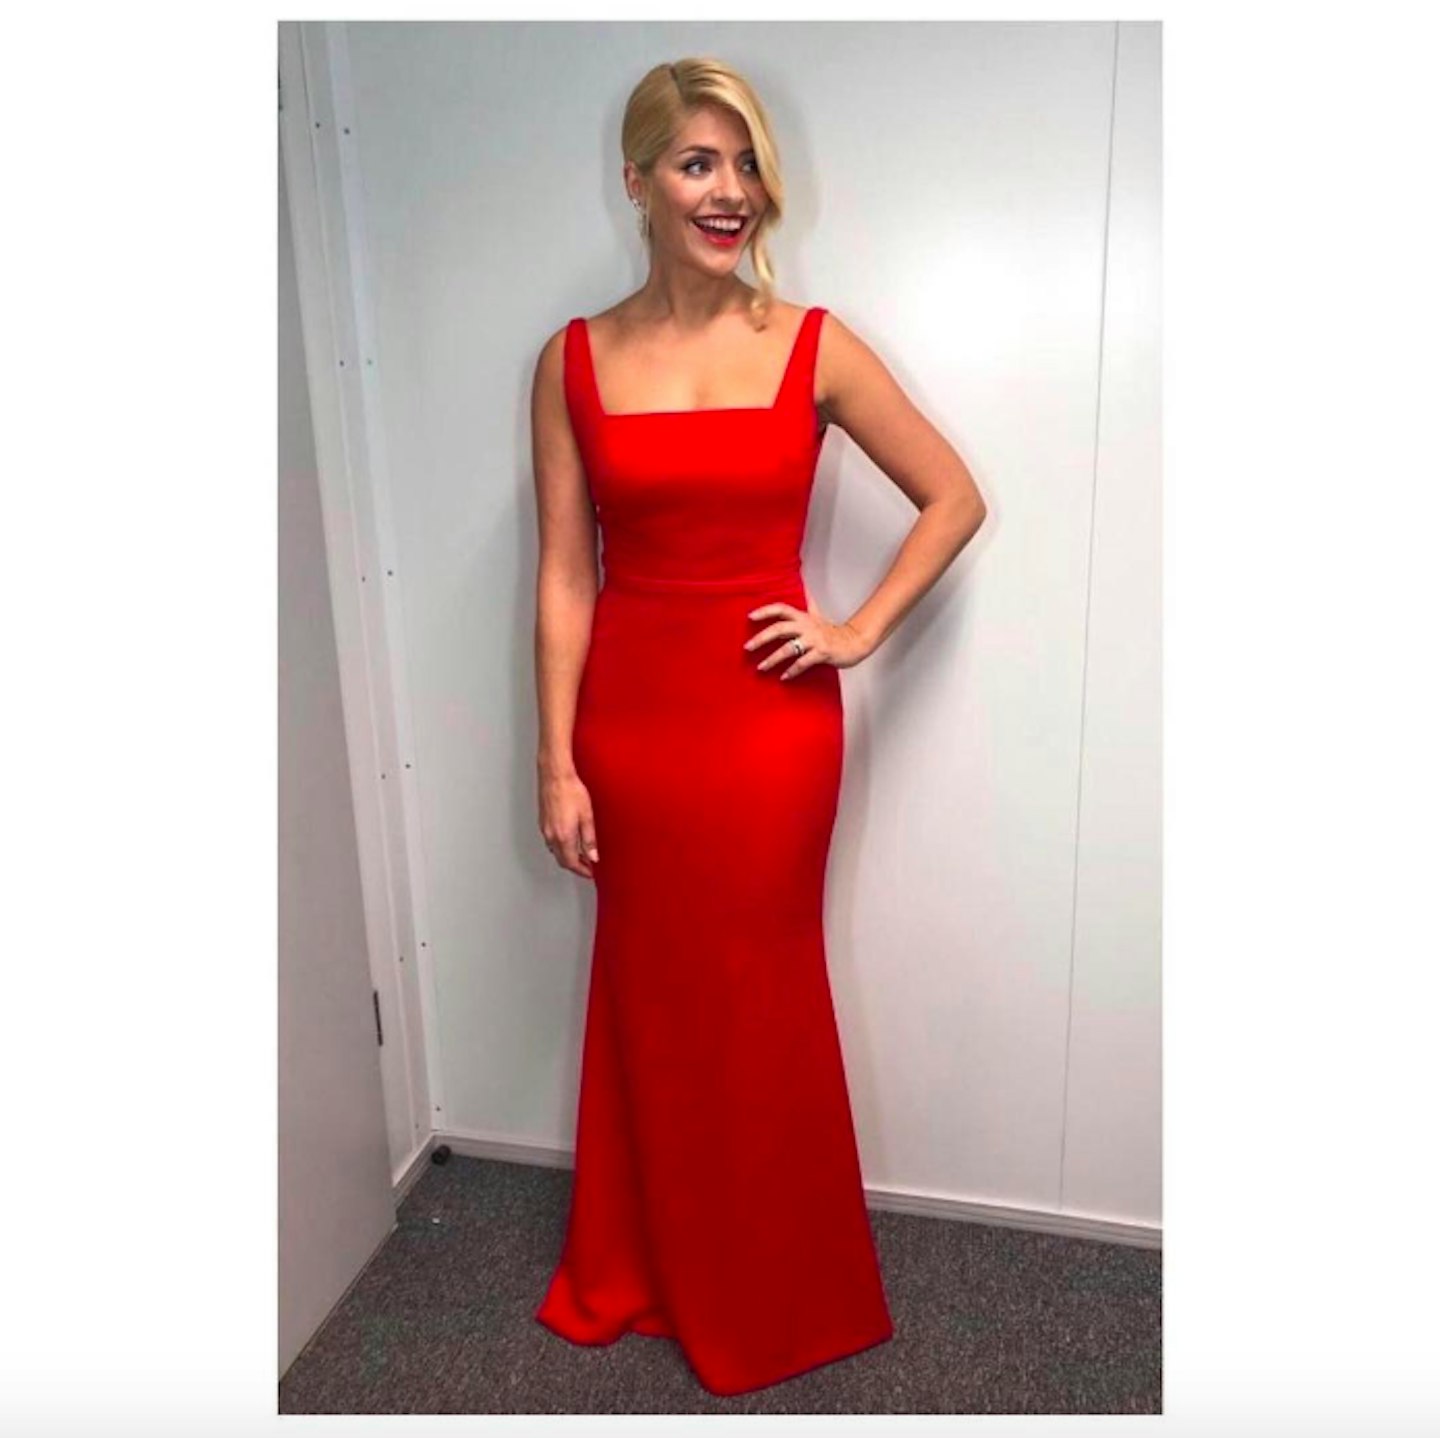 Holly Willoughby's Dancing on Ice outfit - Week 4